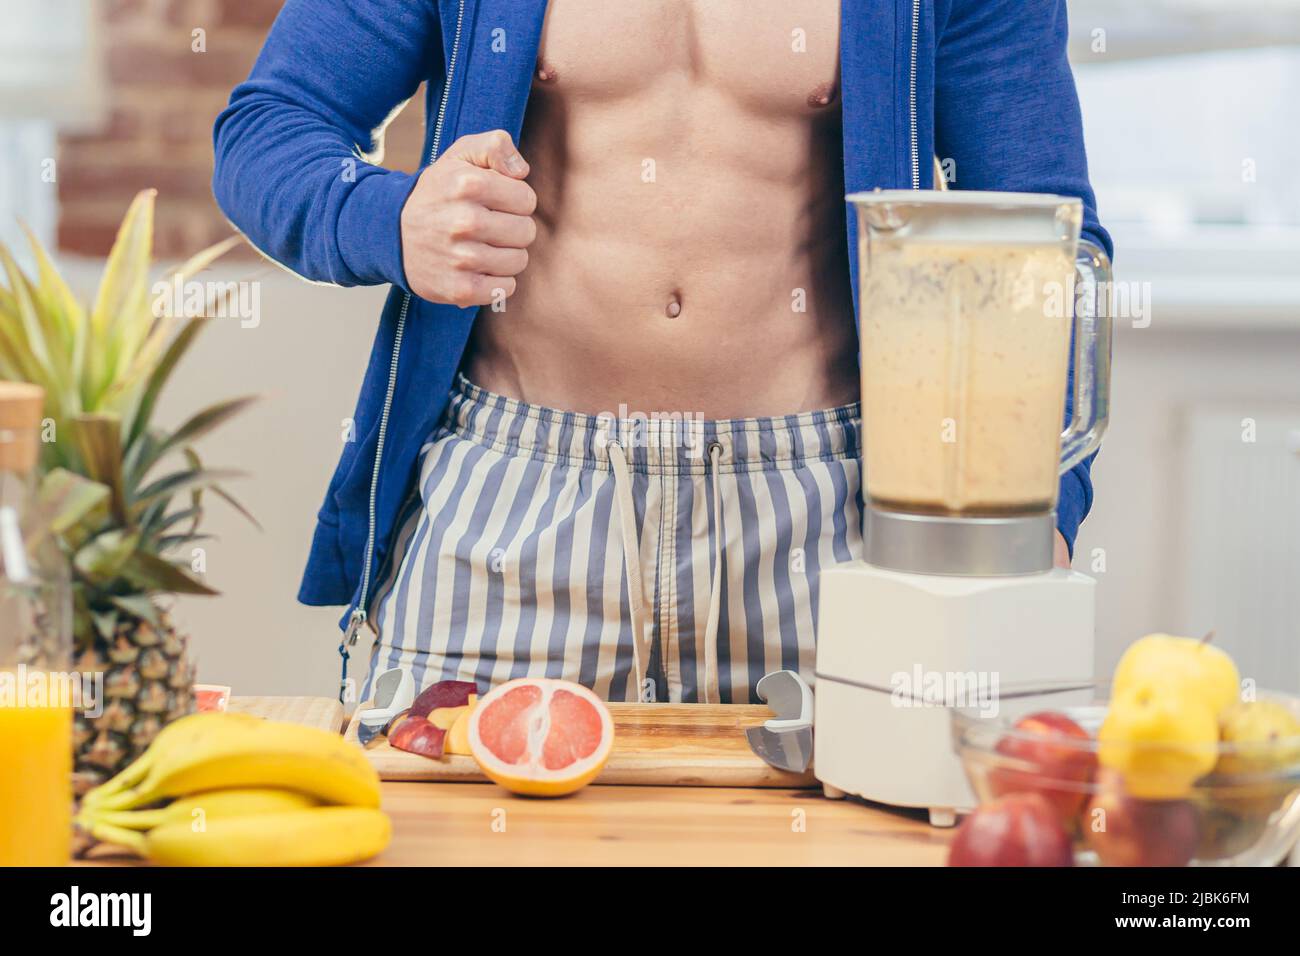 Close up photo, part of body. Male athlete preparing, detox in a blender , fruit salad and fresh juice at home in the kitchen, Stock Photo